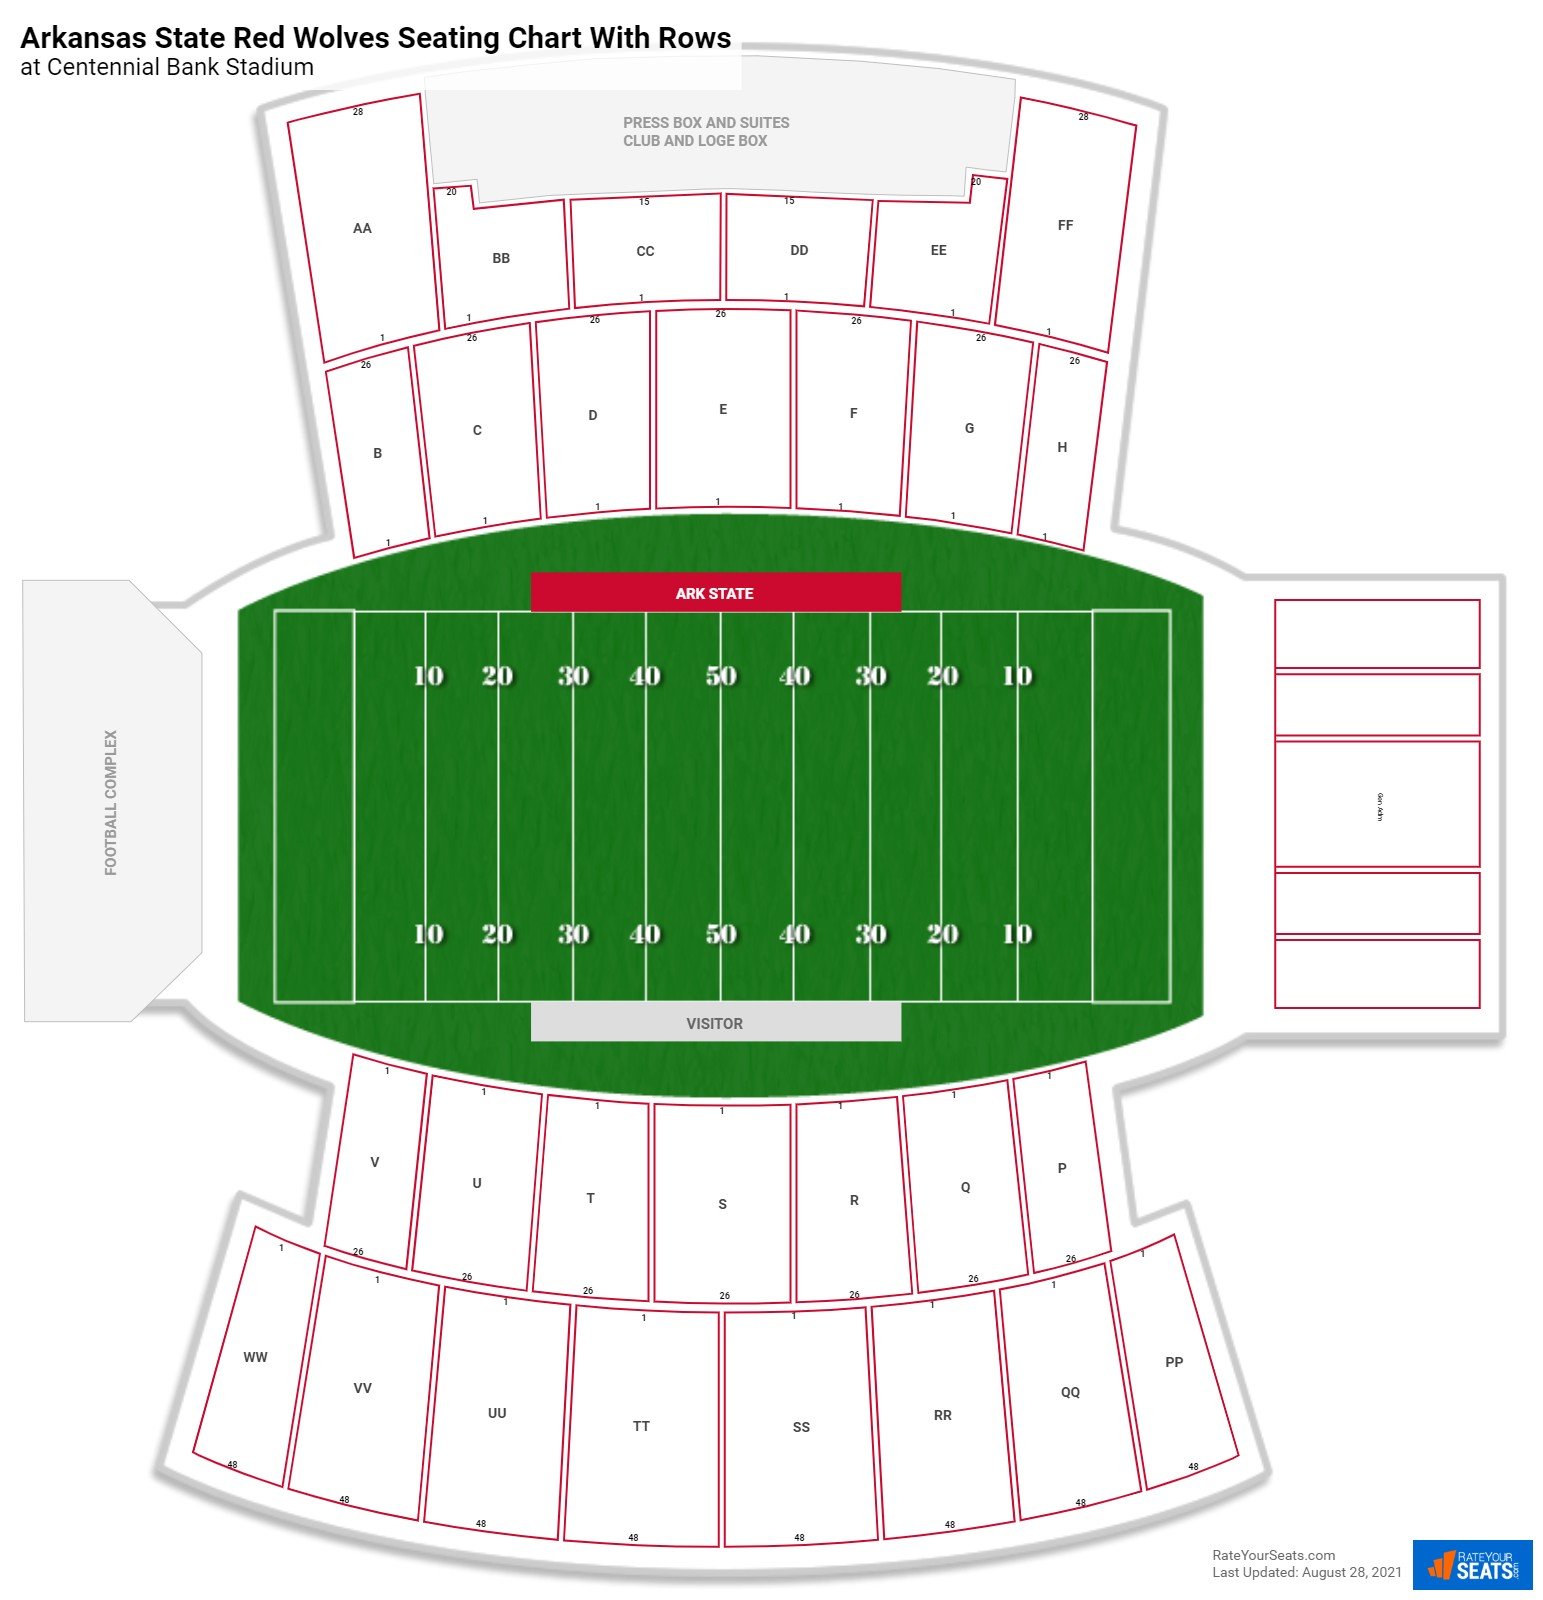 Centennial Bank Stadium seating chart with row numbers